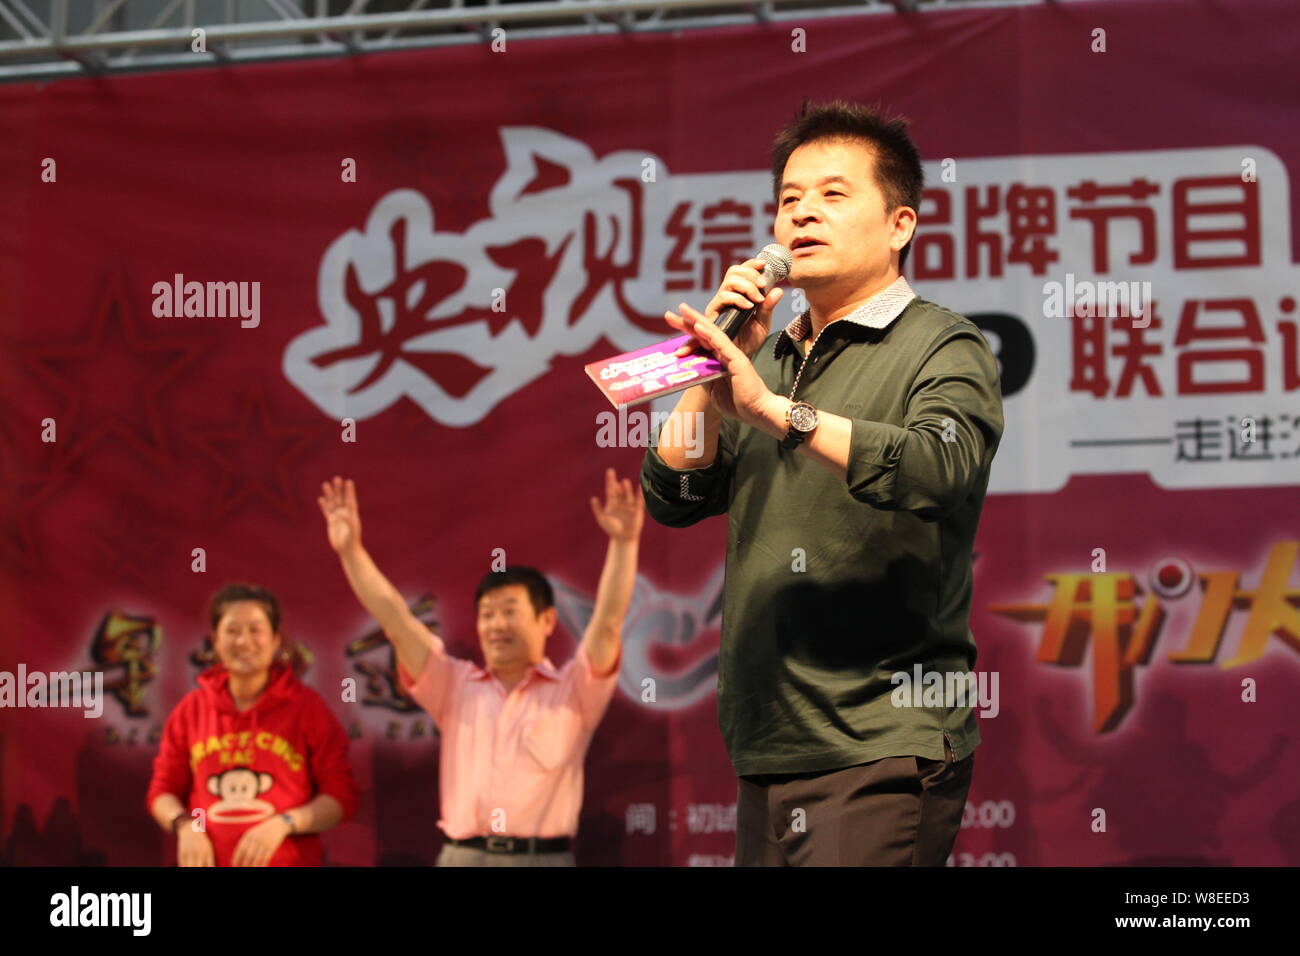 --FILE--Chinese CCTV (China Central Television) host Bi Fujian, front, speaks at a promotional event for CCTV's variety TV program 'Golden 100 Seconds Stock Photo